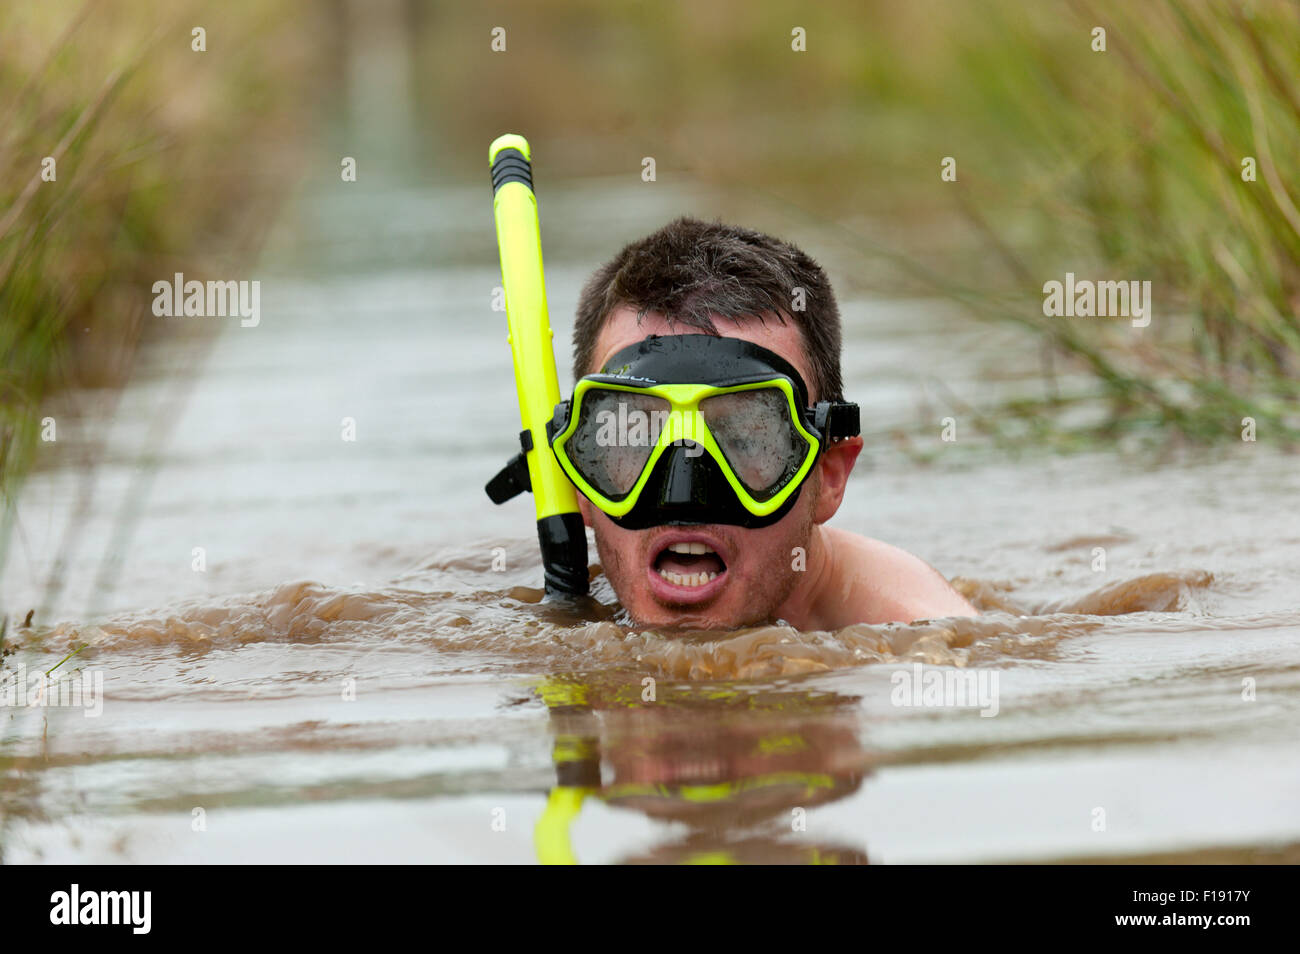 Llanwrtyd Wells, UK. 30th August, 2015. The World Bogsnorkelling Championships were conceived 30 years ago in a Welsh pub by landlord Gordon Green and are held every August Bank Holiday at Waen Rhydd Bog. Using unconventional swimming strokes, participants swim two lengths of a 55 metre trench cut through a peat bog wearing snorkel and flippers. The world record was broken in 2014 by 33 year old Kirsty Johnson from Lightwater, Surrey, in a time of 1 min 22.56 secs. Credit:  Graham M. Lawrence/Alamy Live News Stock Photo